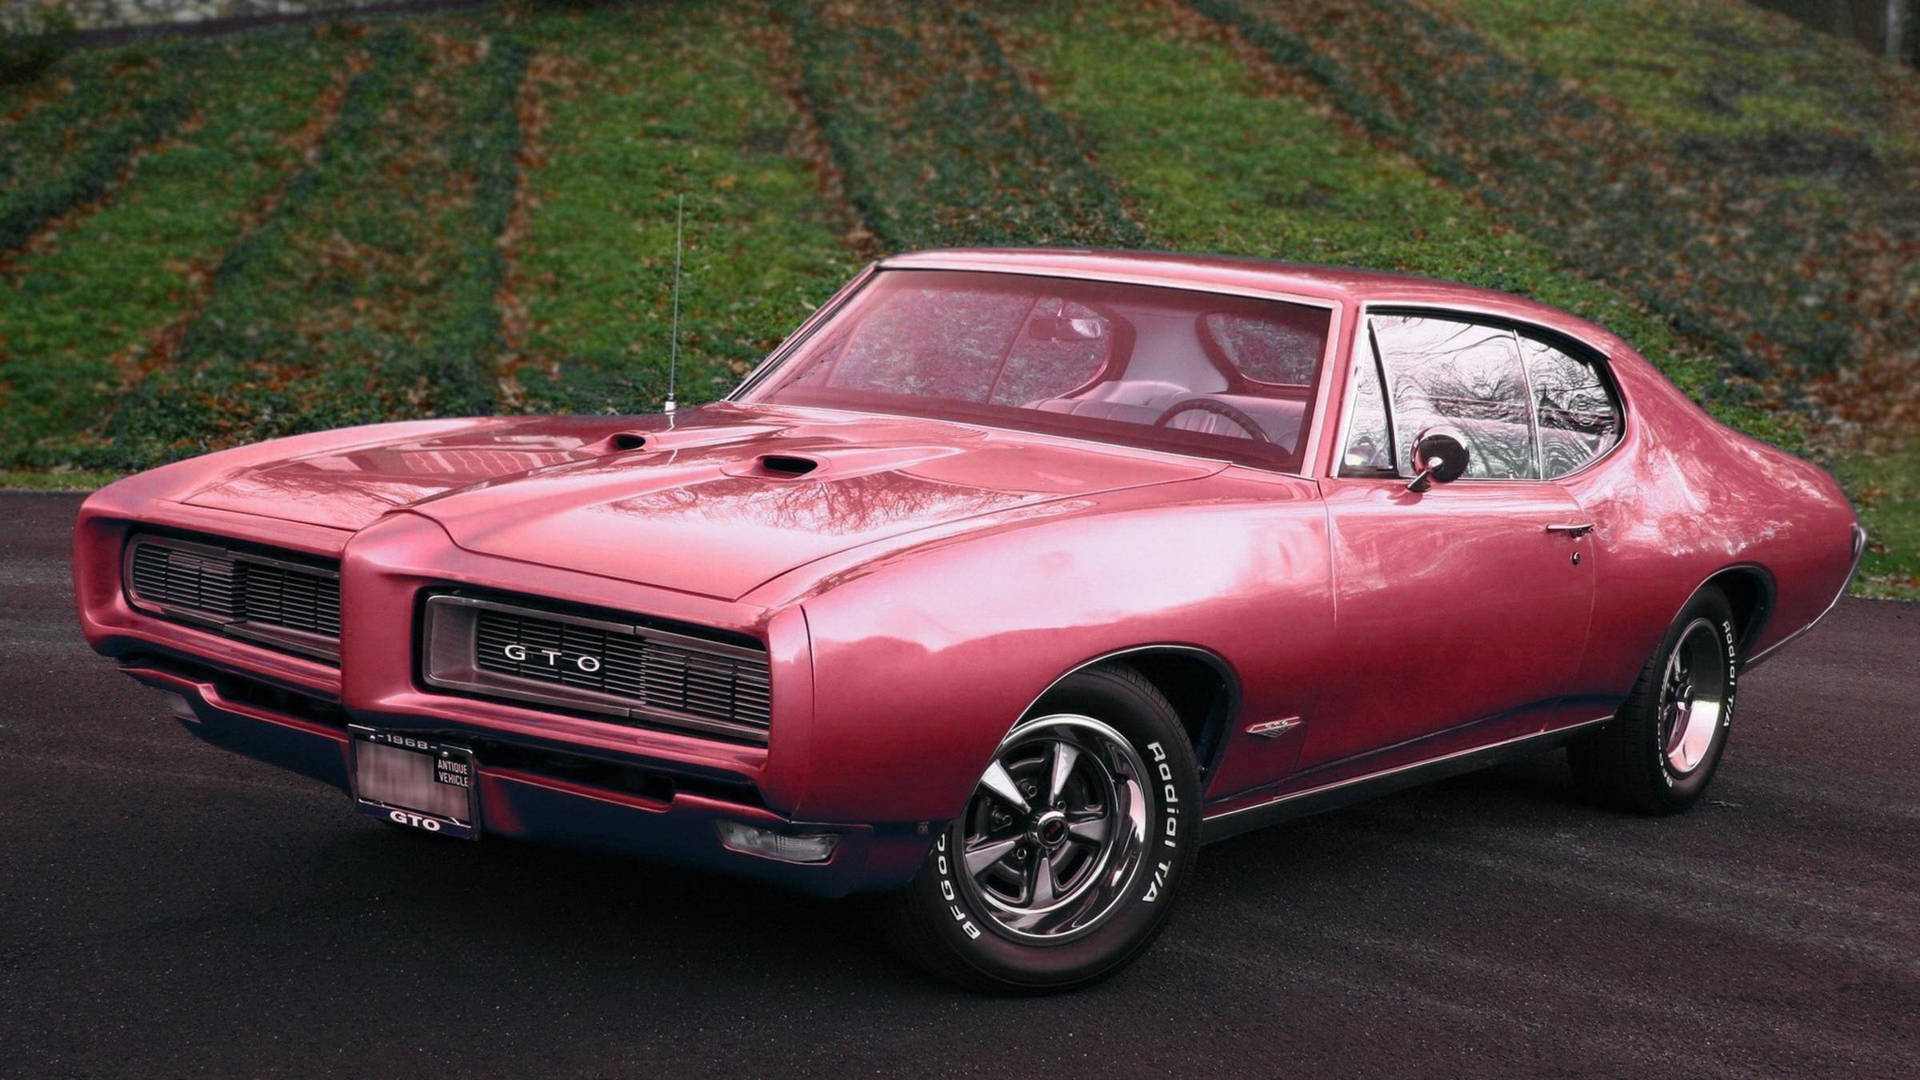 Classic Pink Pontiac GTO in High Definition Wallpaper